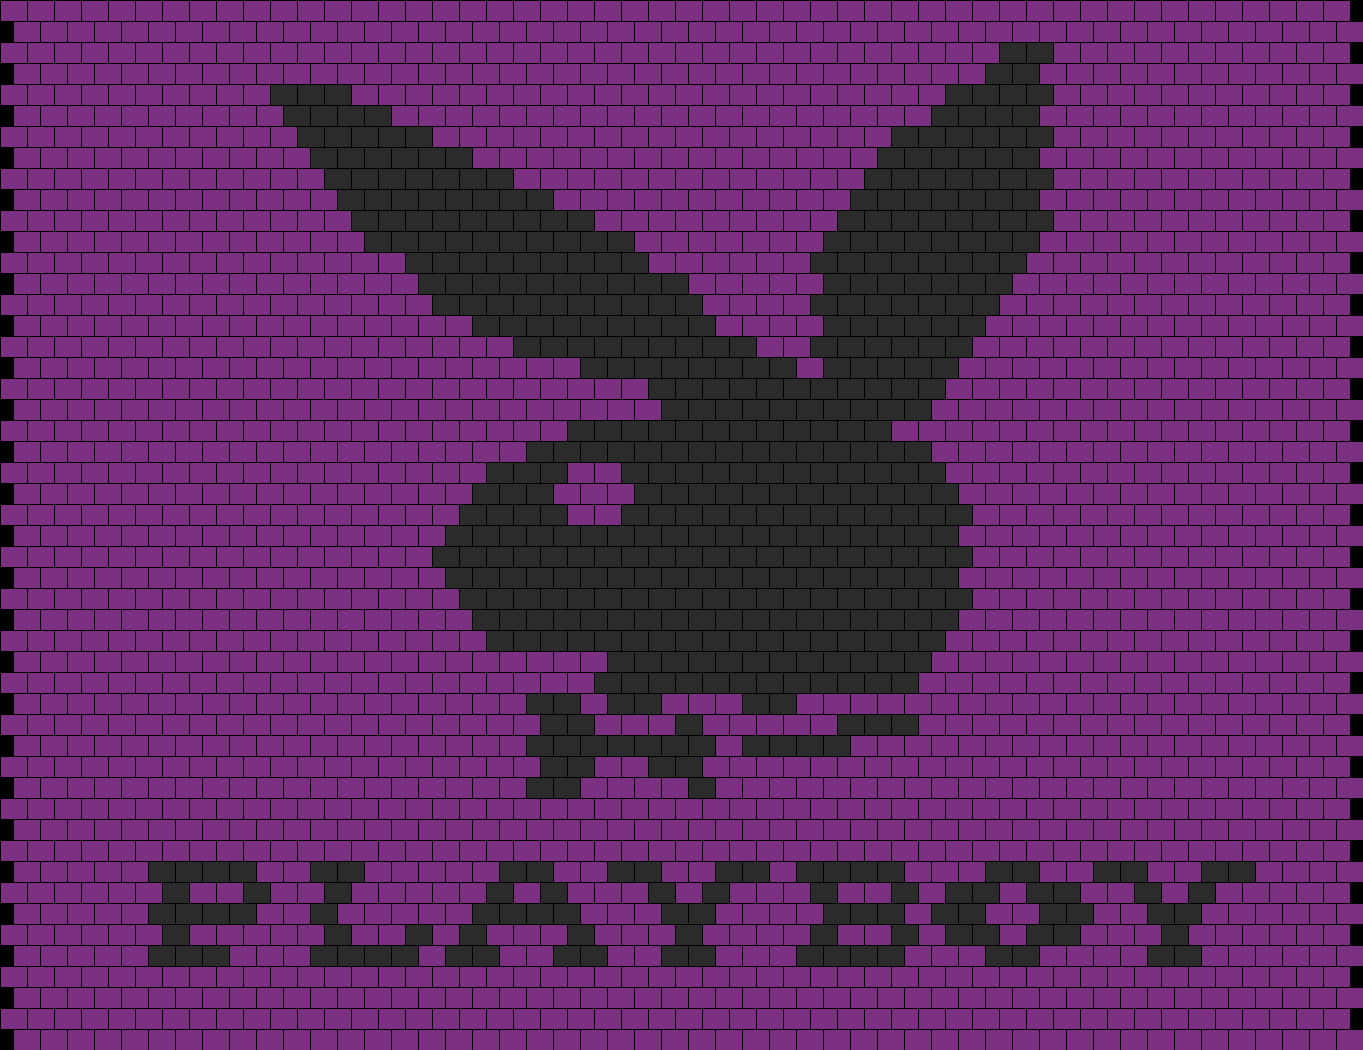 "The Playboy Lifestyle Will Always Be a Symbol of Freedom"